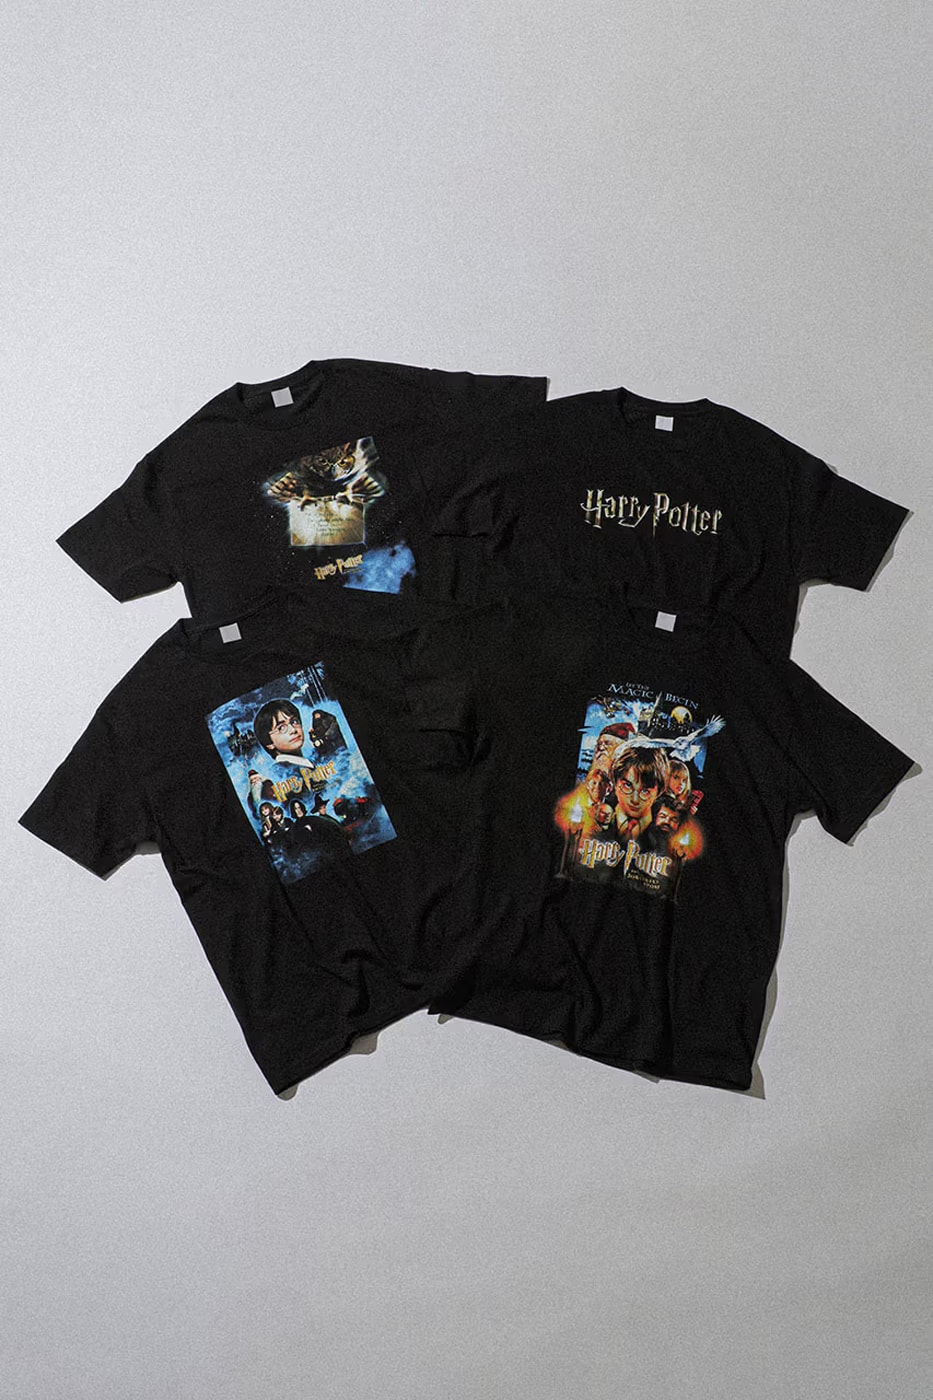 JOURNAL STANDARD Releases Nostalgic 'Harry Potter' Capsule t-shirt series graphcics harry potter and the philosopher stone order of the phoenix goblet of fire prizoner of azkaban chamber of secrets deathly hallows warner bros daniel radcliffe rupert grint hermione granger emma watson hedwig hogwarts doby